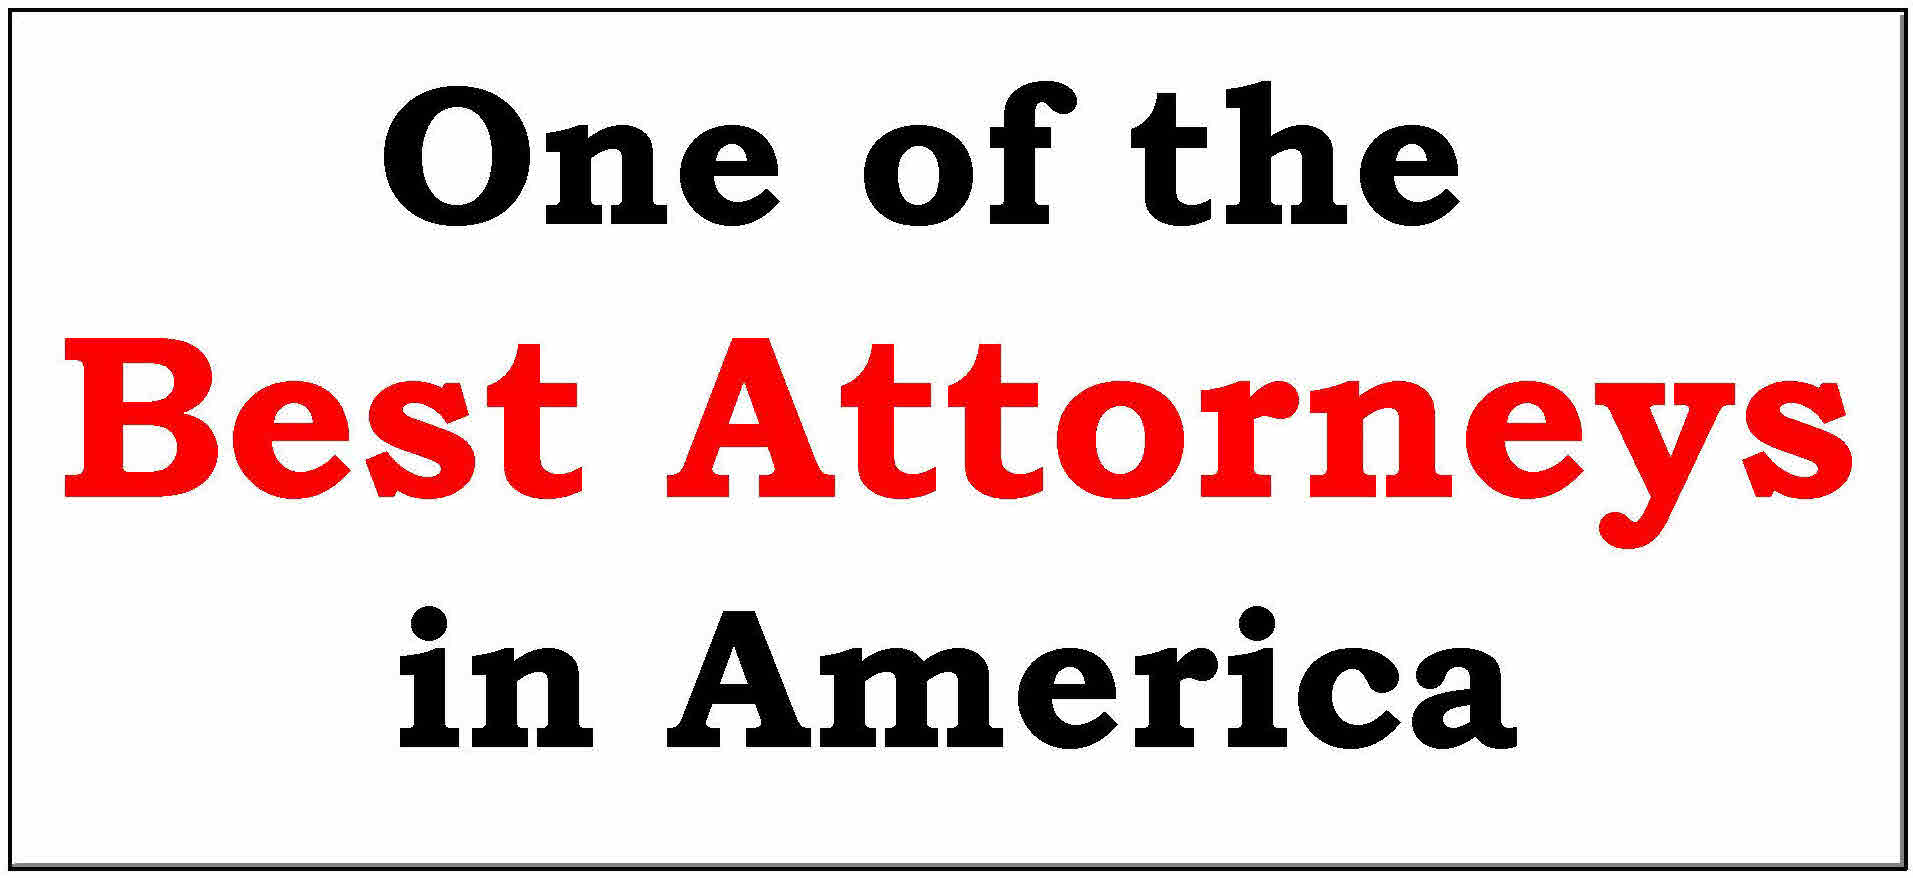 Selected as one of the 'Best Lawyers' in the United States each year since 2006